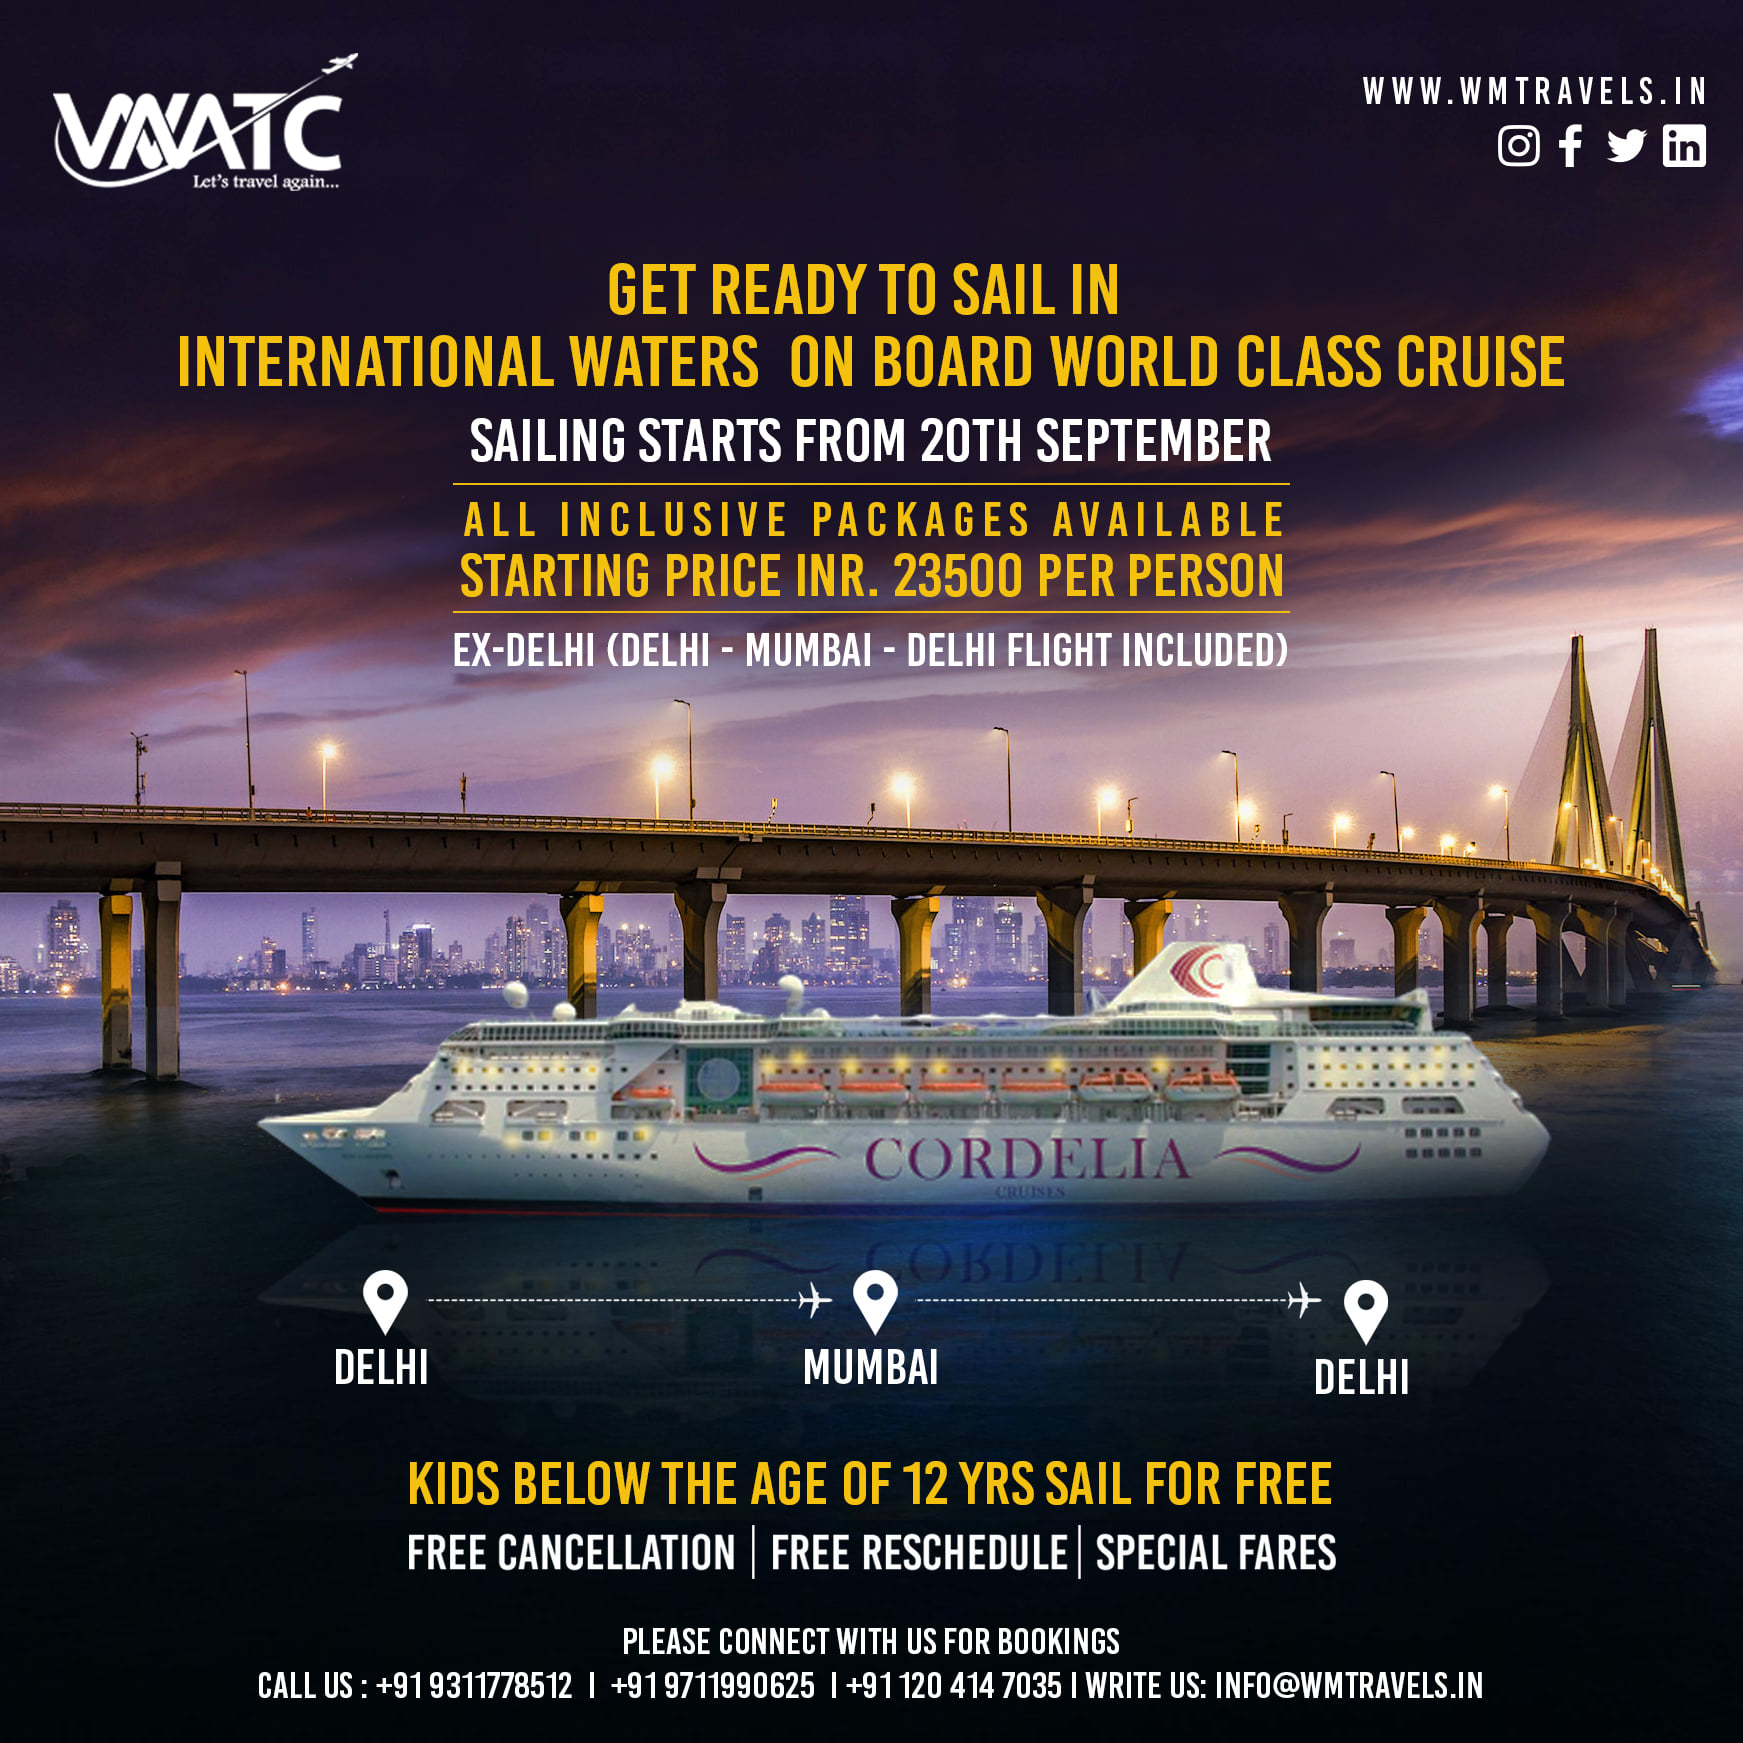 WM Travel Solutions Pvt Ltd; India's leading Travel Service Provider is Offering Best in Class Cruise Experience: Get The Best Offer